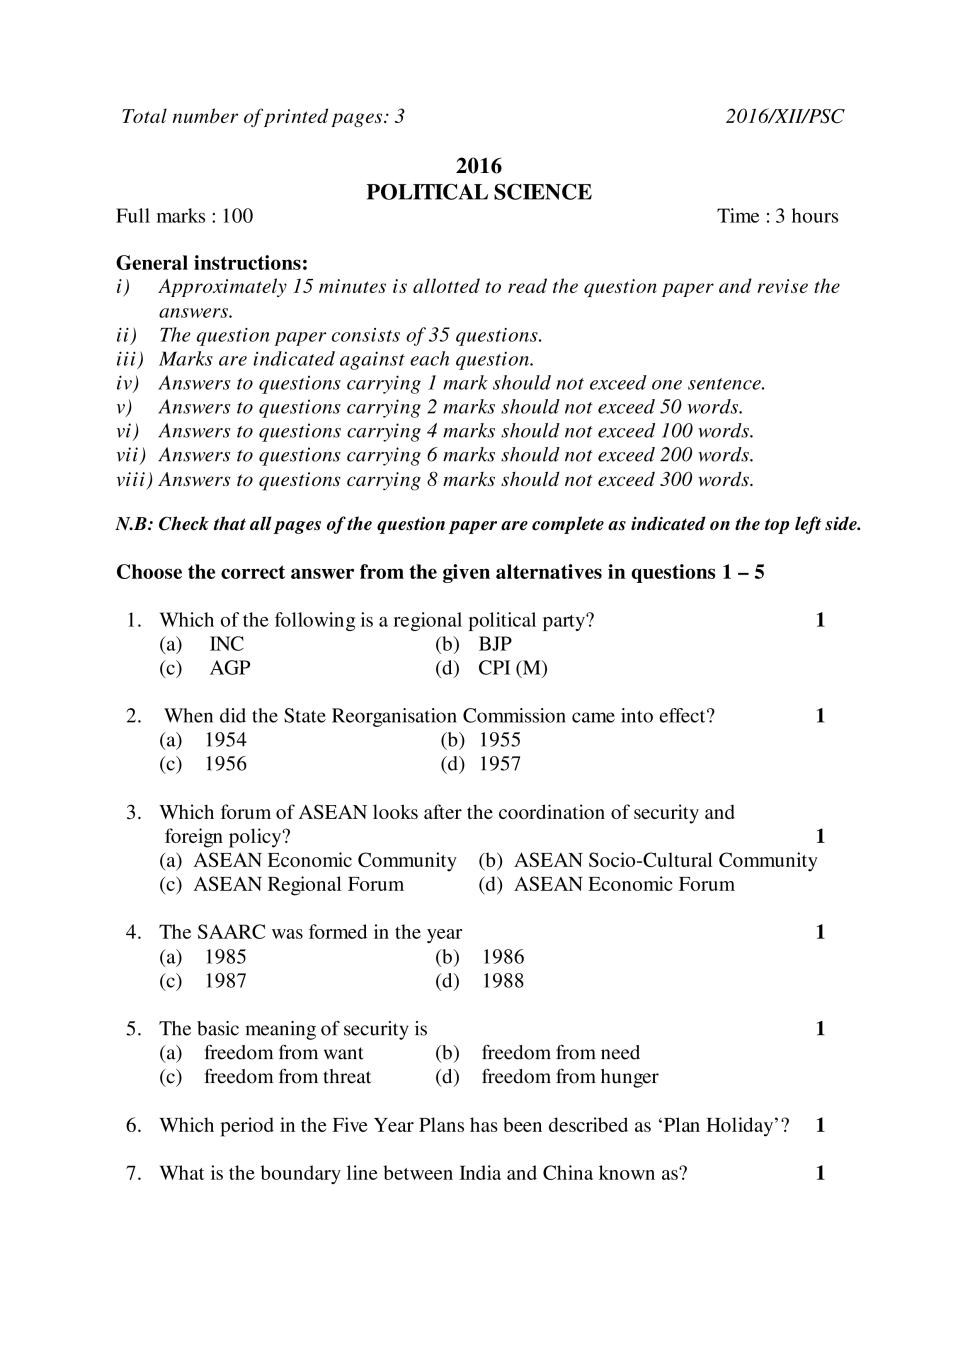 NBSE Class 12 Question Paper 2016 for Political Science - Page 1